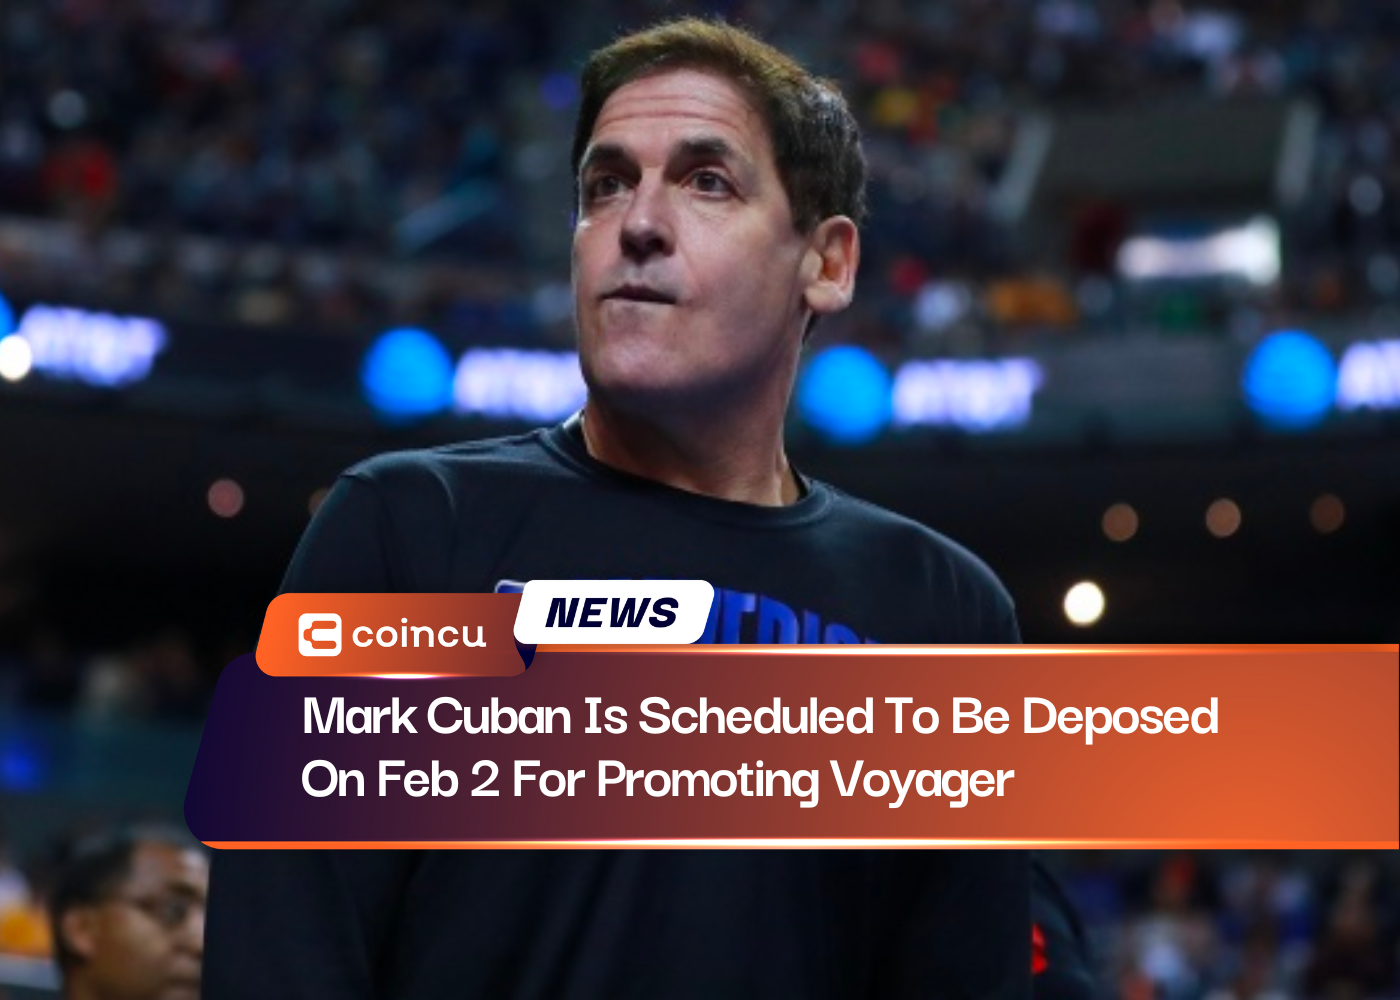 Mark Cuban Is Scheduled To Be Deposed On Feb 2 For Promoting Voyager